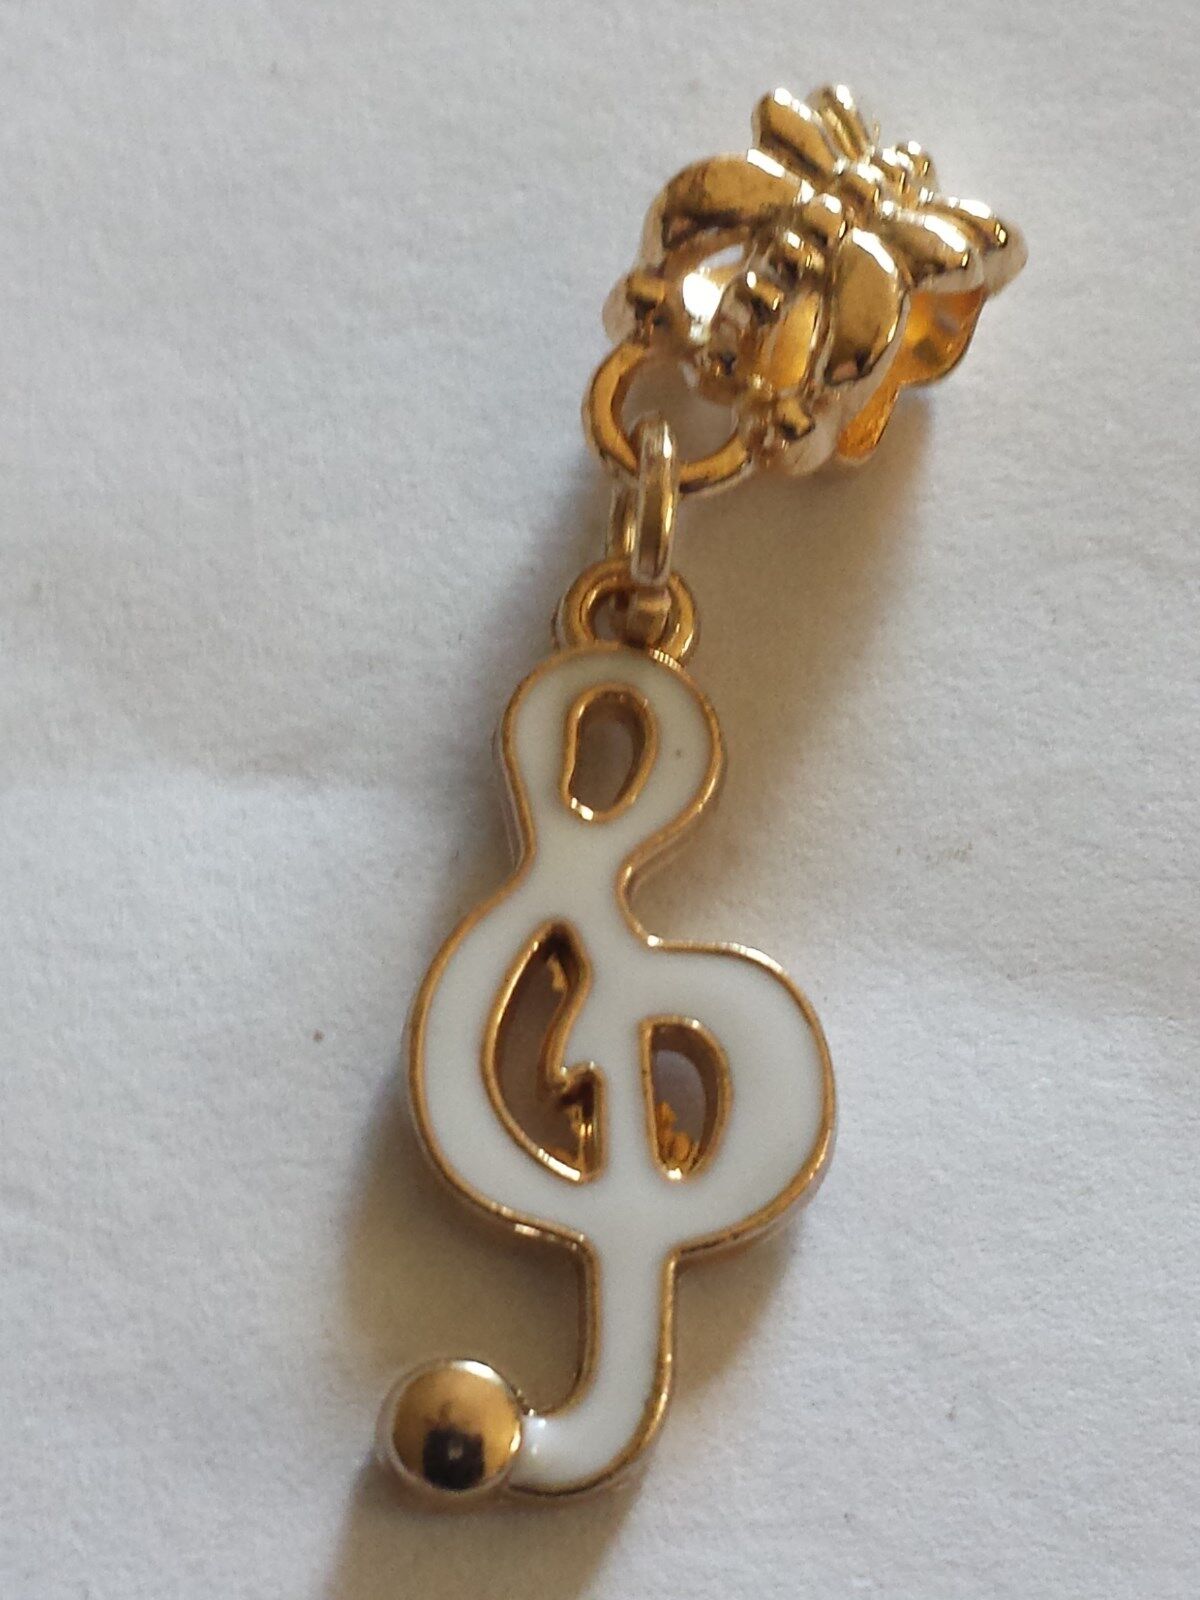 New European Charm Gold White Music Note. Buy 1,19 more ship free buy 5 get 1 F